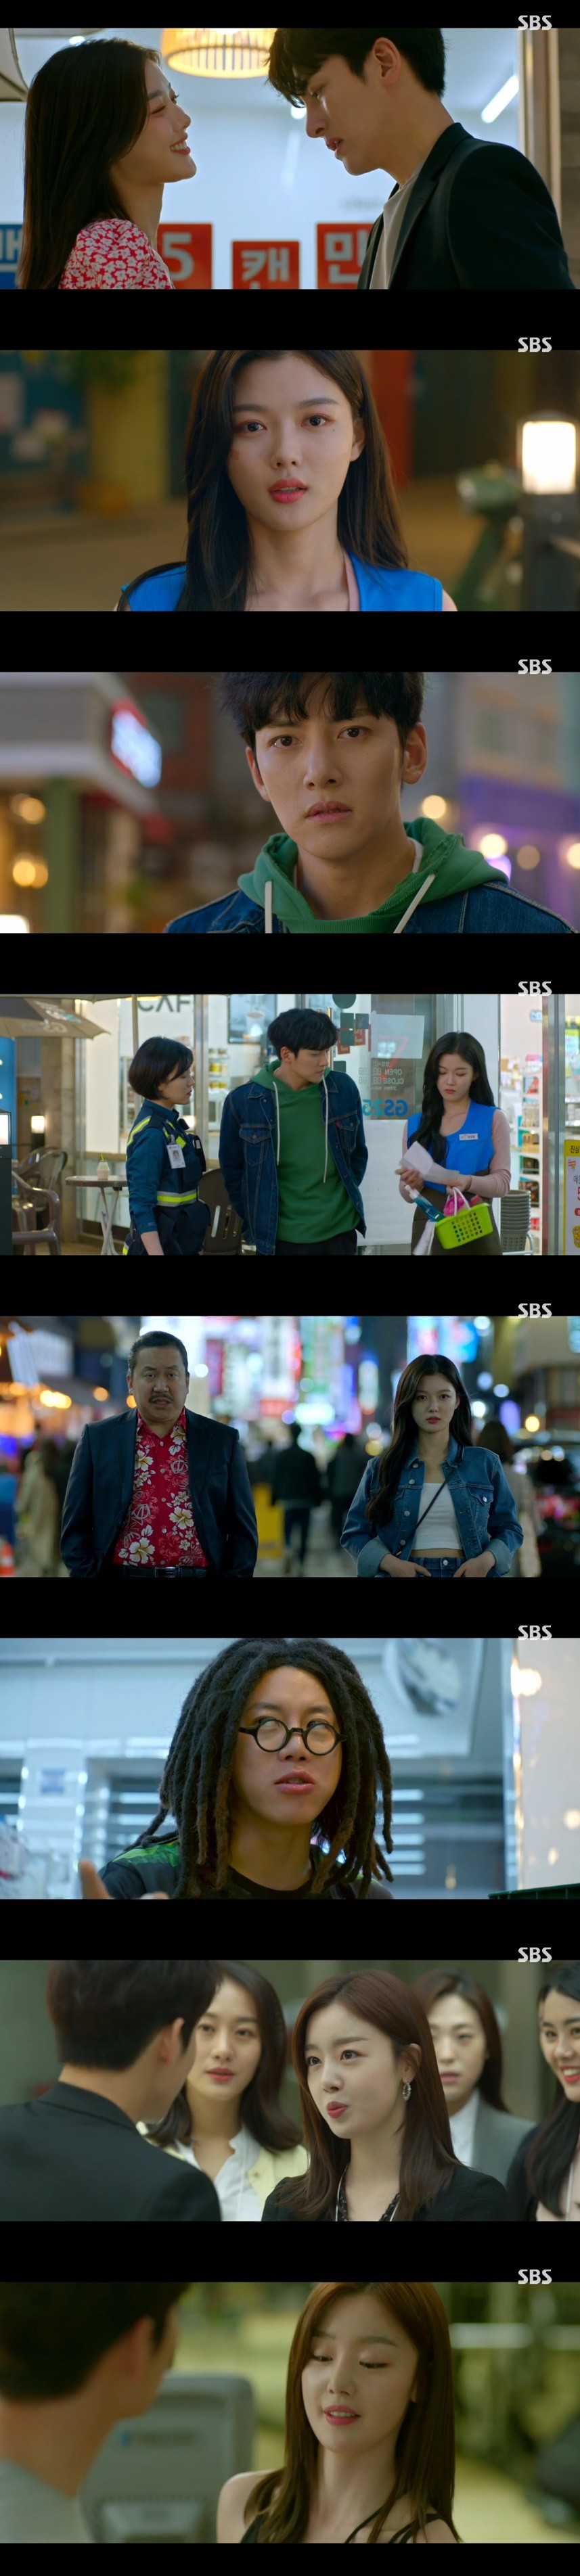 Kim Yoo-jung and Ji Chang-wook, Convenience store morning star, made The Slap as president and Alba.In the SBS drama Convenience store Morning Star, which aired on the 19th, the first intense meeting between Choi Dae-heon (Ji Chang-wook) and Kim Yoo-jung was broadcast.On this day, high school student Jung Sae-byeol gave a tobacco shuttle to Choi Dae-heon, who was pushed by friends.However, Choi Dae-heon did not go to hell, and instead of tobacco, he bought a silver band and advised, Get off if you want, cut off, cut off the bones.Being an adult and walking youth in a more wonderful job, he said.So, the star said, My brother is the first person to tell me to stop tobacco.The star picked up Choi Dae-heons number and said, Brother, be careful. I do not know what to do with my brother.Three years later, Choi Dae-heon quit the company and started a Convenience store franchise business.There are quite a few girls who are looking for a Convenience store to see Choi Dae-heons face, but all of them are small and there are no other customers.Choi Dae-heons family helped the Convenience store work, but the problem grew with Choi Yong-pil (Lee Byung-joon) hurting his arm.Choi Dae-heon, who worked on the Convenience store for two nights, eventually wrote Alba Recruitment on the door of the store.And a star of the morning appeared in front of Choi Dae-heon: I came to see an Alba interview.Soon Choi Dae-heon recognized the star that had made the tobacco shuttle in the past and decided to send it back as soon as possible.However, Choi Dae-heon fell asleep while the star went to the bathroom for a while, and the star did the Convenience store work.Even the star was good at it. Choi Dae-heon was forced to hire an Alba intern by being dragged into the star.But soon came something: Choi Dae-heon suspected a good morning star when money went from a can to a visa.Choi Dae-heon was frustrated that the star did not receive a phone call, and went to the house of the star on the resume.However, at the address where the star was small, a prostitution trap investigation was taking place.Choi Dae-heon, who was arrested at the scene, was only able to be released after showing the resume of the star.The star that I was looking for was in the Convenience store.Choi Dae-heon, who heard this from his mother, Gong Bun-hee (Kim Sun-young), was worried that he was robbed of the Convenience store tobacco after the money.Choi Dae-heon confirmed that Tobacco was okay, but was relieved that I almost did not come to this timing.At this time, the police who met at the Convenience store visited earlier.Police asked what happened and said, Alba just ran away because he stole 500,000 won.I took the money that my mother had to spend urgently, said Jeong Sae-byeol, who learned that she was misunderstood as a thief.And I dont always have to be part of a family history. Youre just like everyone else. Youre not listening. Its okay.I do not do this once or twice. After that, Jung Sung-sung cracked down on his brother, Jung Eun-bum (Solvin), who plays poorly, and lamented, Even if you and I do the same thing, we are more suspicious and cursed.The next day, the star went to work at the Convenience store. Choi Dae-heon recommended a beef lunch box to the star, replaced the cleaning, and replaced the sorry heart.Choi Dae-heon said, How do you not doubt that the money has disappeared on the first day of your visit?I do not want to be angry, but I have to apologize, said Choi Dae-heon, who apologized immediately.The star forgave Choi Dae-heon coolly.Choi Dae-heon was in a relationship with head of the headquarters, Yoo Yeon-ju (Han Seon-hwa), who had an evening appointment with Yoo Yeon-ju, and Choi Dae-heon waited anxiously for the star.I was delighted to see the manager and I was soaking perfume, said Choi Dae-heon, who poured cold water on his girlfriends presence.Jung Sang-bum, who straightened his face, gave a meaningful warning that I am sorry to the woman Friend because I will see him every day and fall in love with me and my affection will cool down.The star saw off Choi Dae-heon with a smile.Choi Dae-heon regretted: I shouldnt have informed the morning star of the day of the performance of Mr.Choi Dae-heons Friend Han-sik (Pinson of Eummunseok) called Choi Dae-heon and reported that Alba calls the Friends and takes the night.The star was playing with the friends in front of the Convenience store.Choi Dae-heon was furious, saying, How dare you put a straw in my Convenience store?The star was delighted and laughed when Choi Dae-heon, who had gone on a date, appeared in front of him.